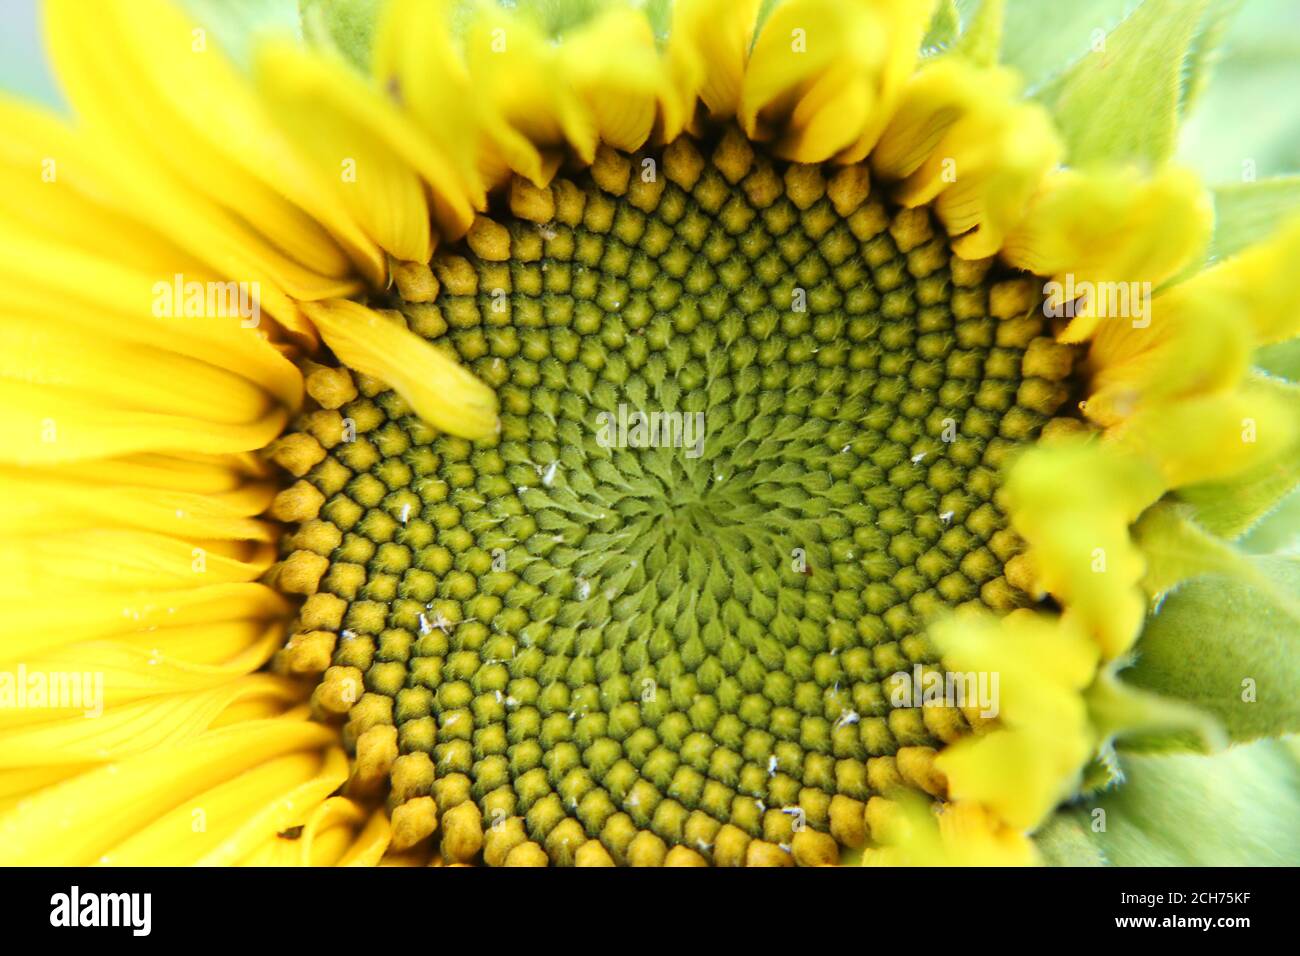 Sunflower head close up, image three of three in series of growing sunflowers Stock Photo